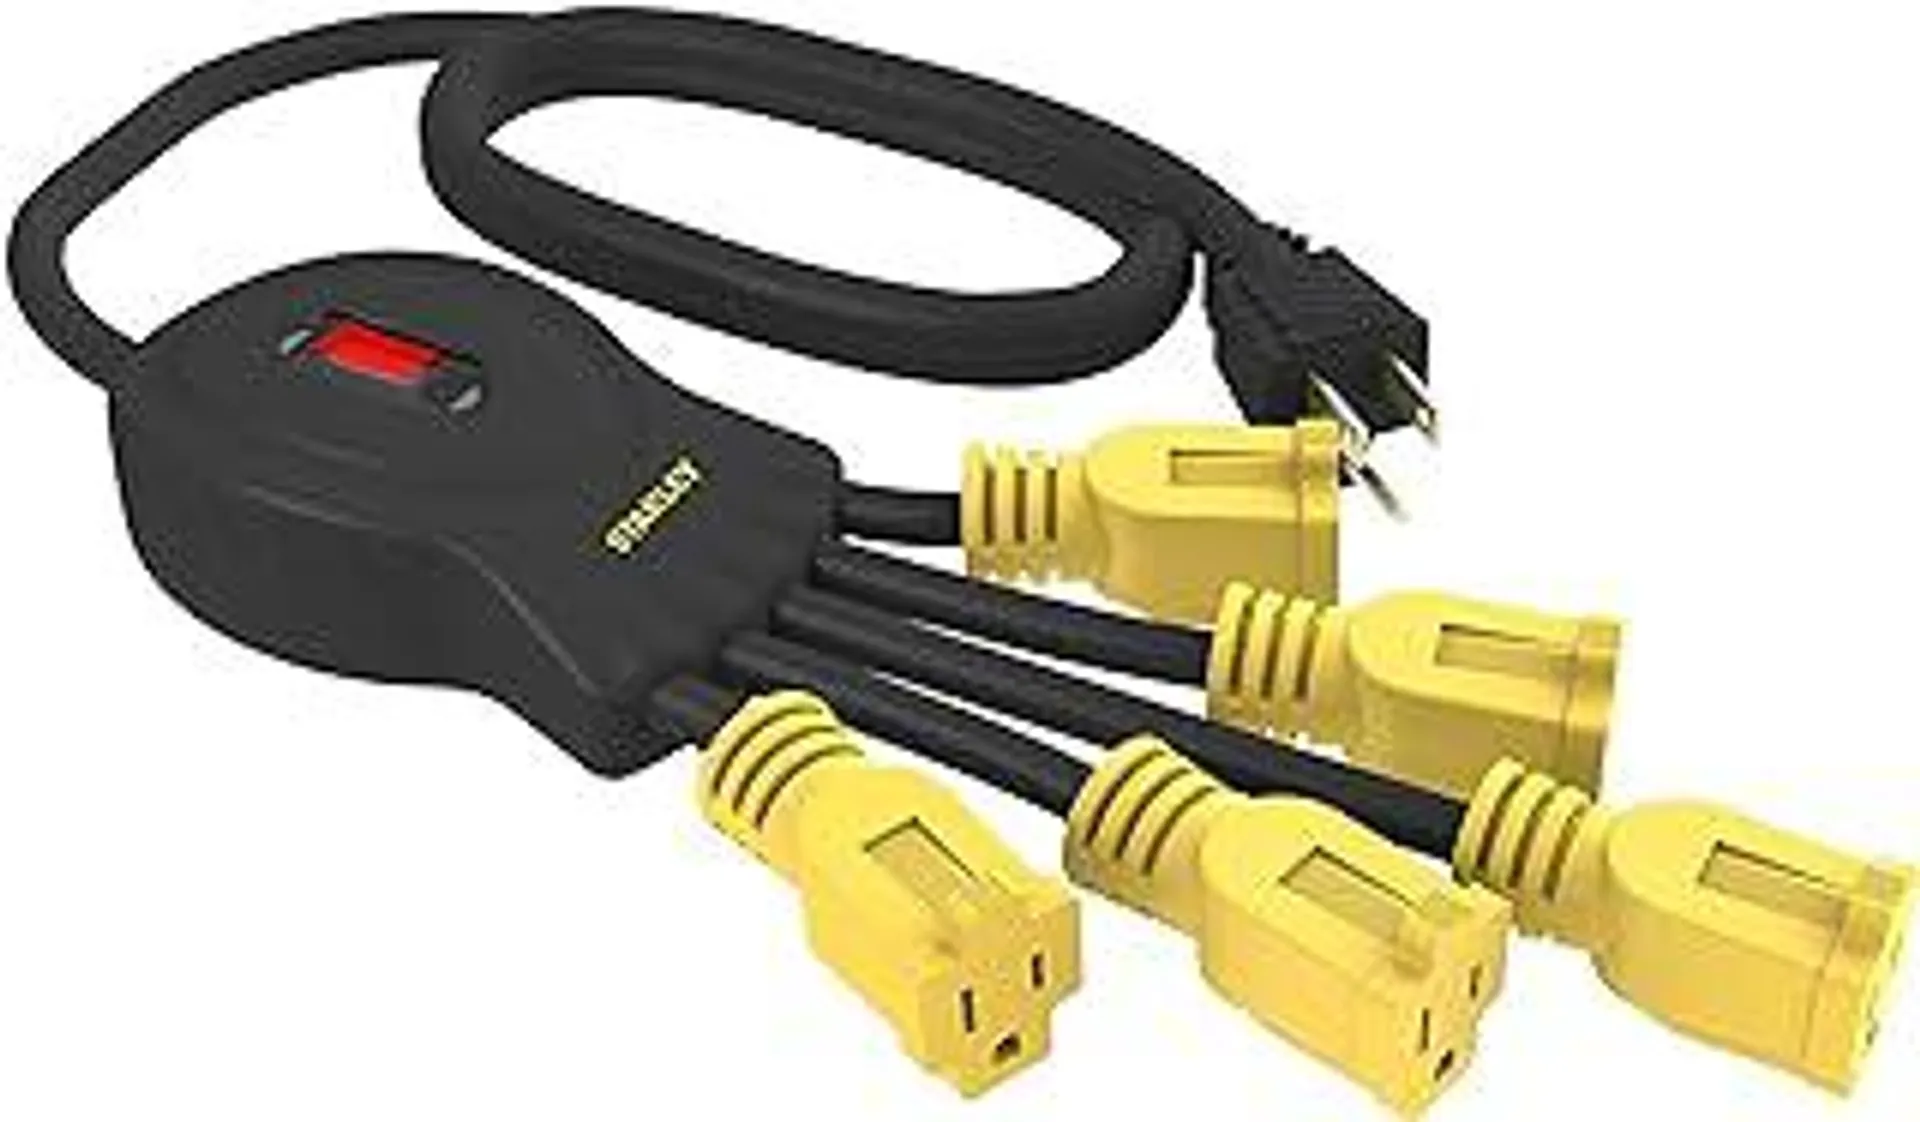 31500 PowerSquid 5-Outlet Multiplier (Yellow) Power Cords